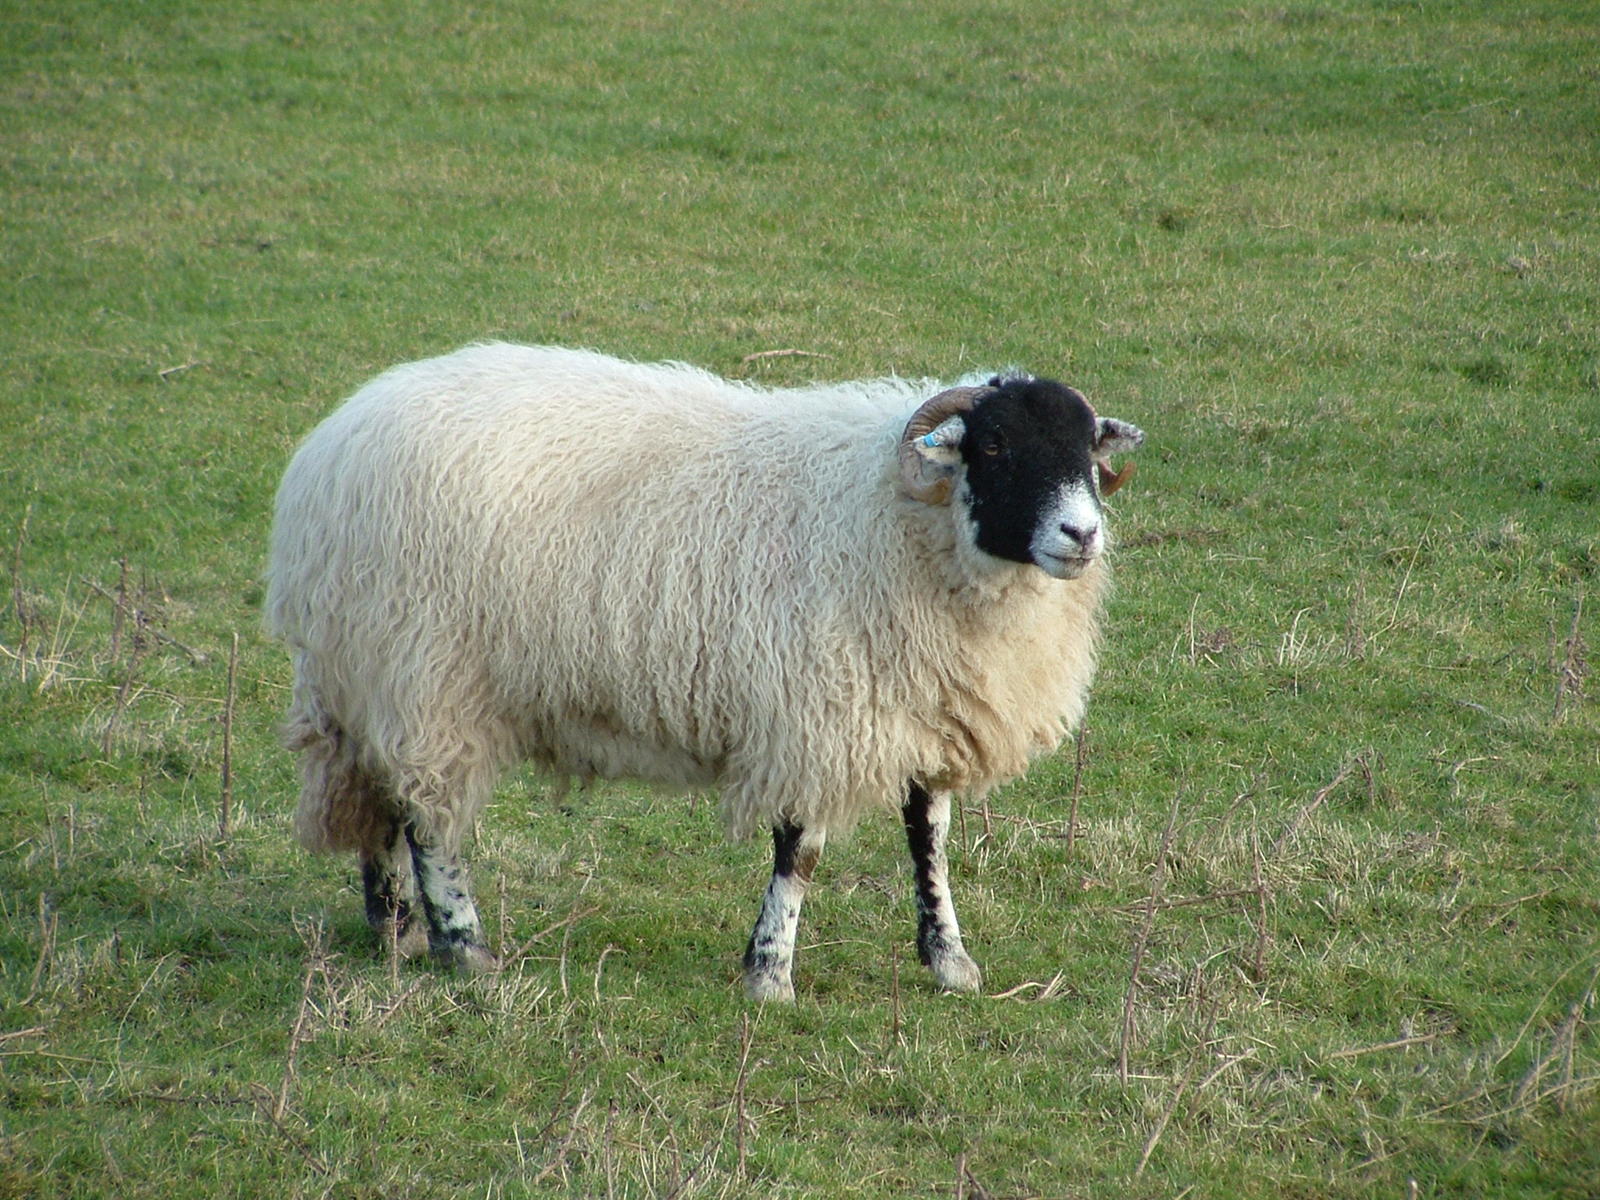 a very big hairy looking sheep standing on some grass